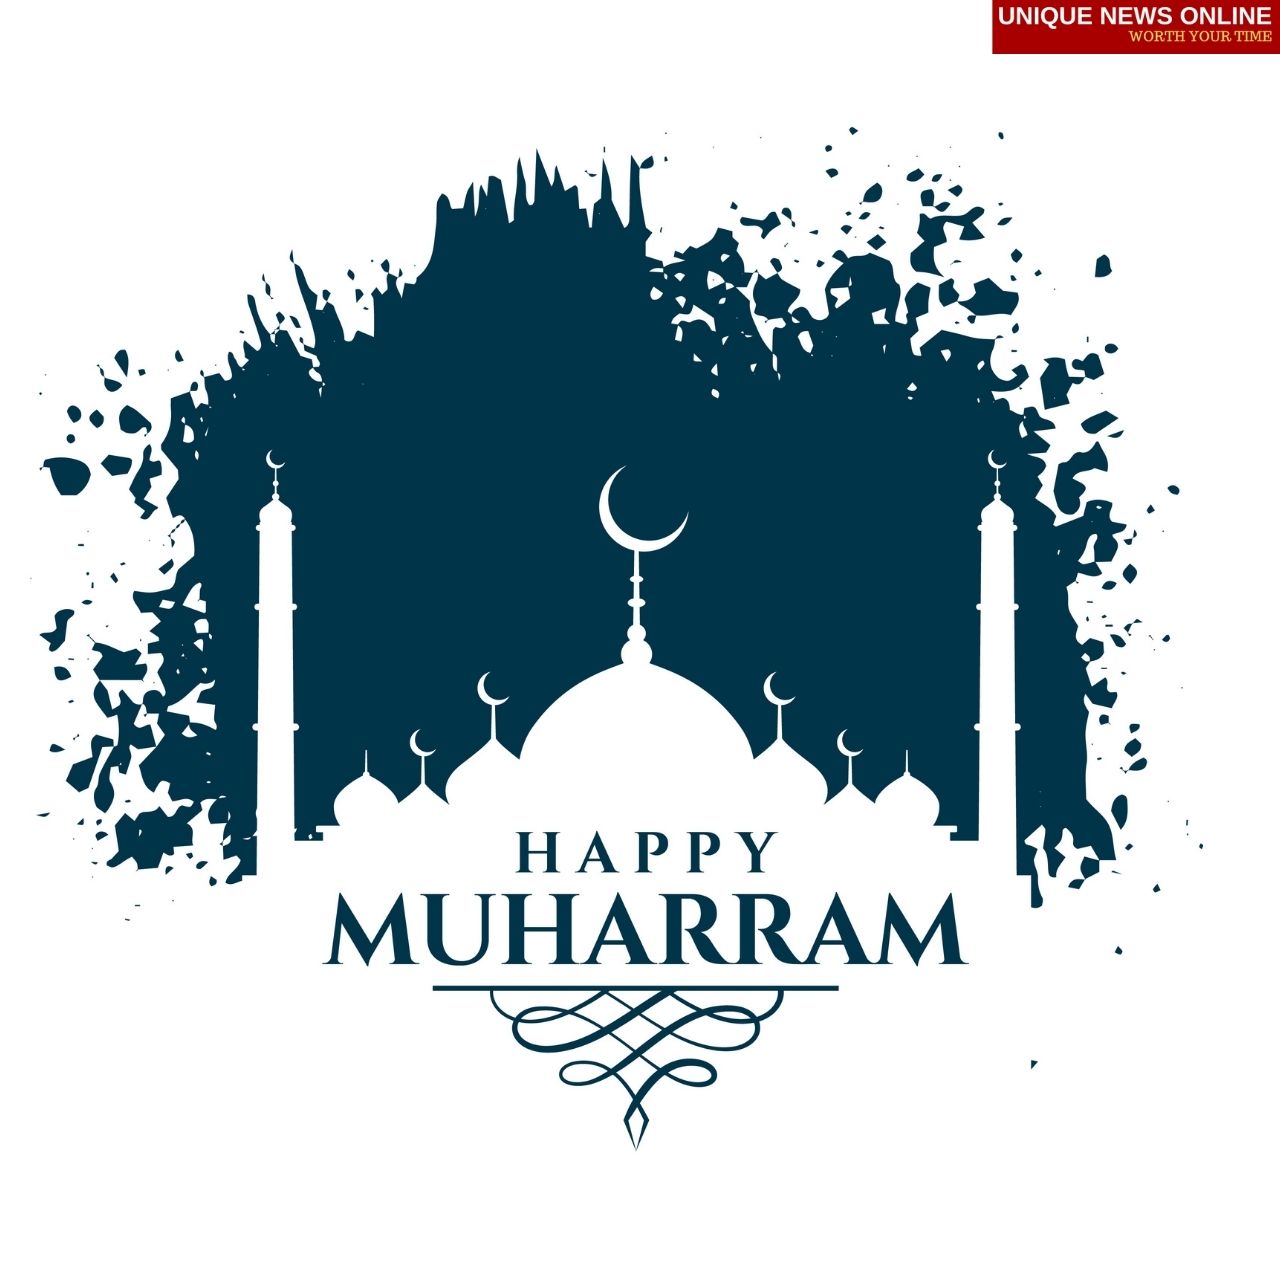 Muharram 2021 Wishes and Quotes: Shayari, Status, Greetings, Messages, and HD Images to send to your loved ones